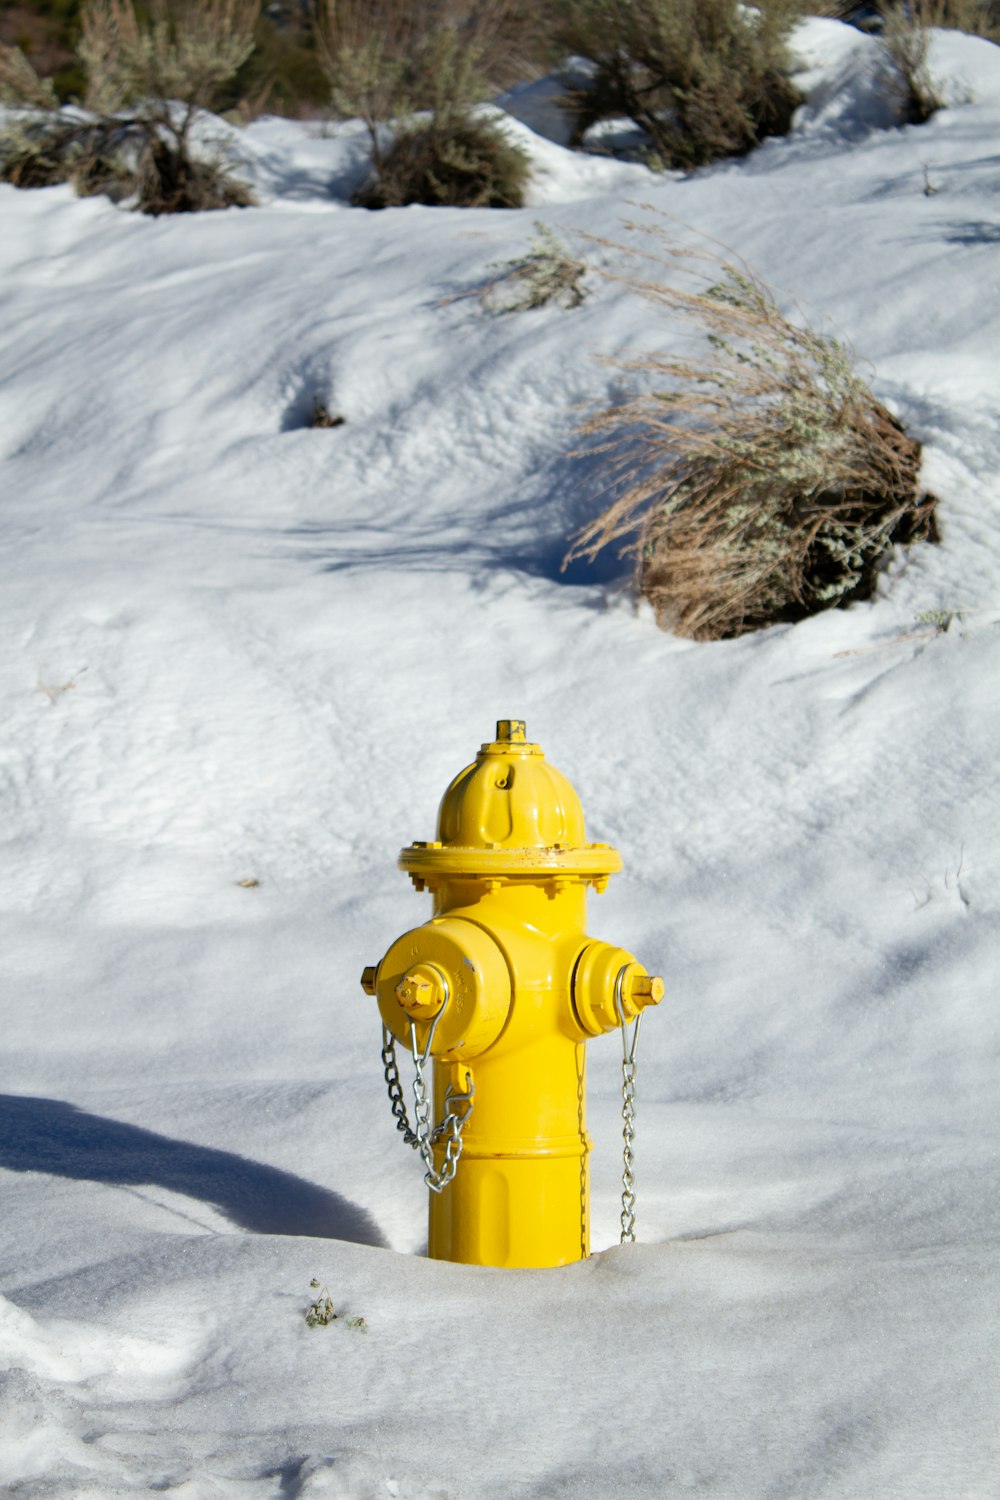 yellow fire hydrant on snow covered ground